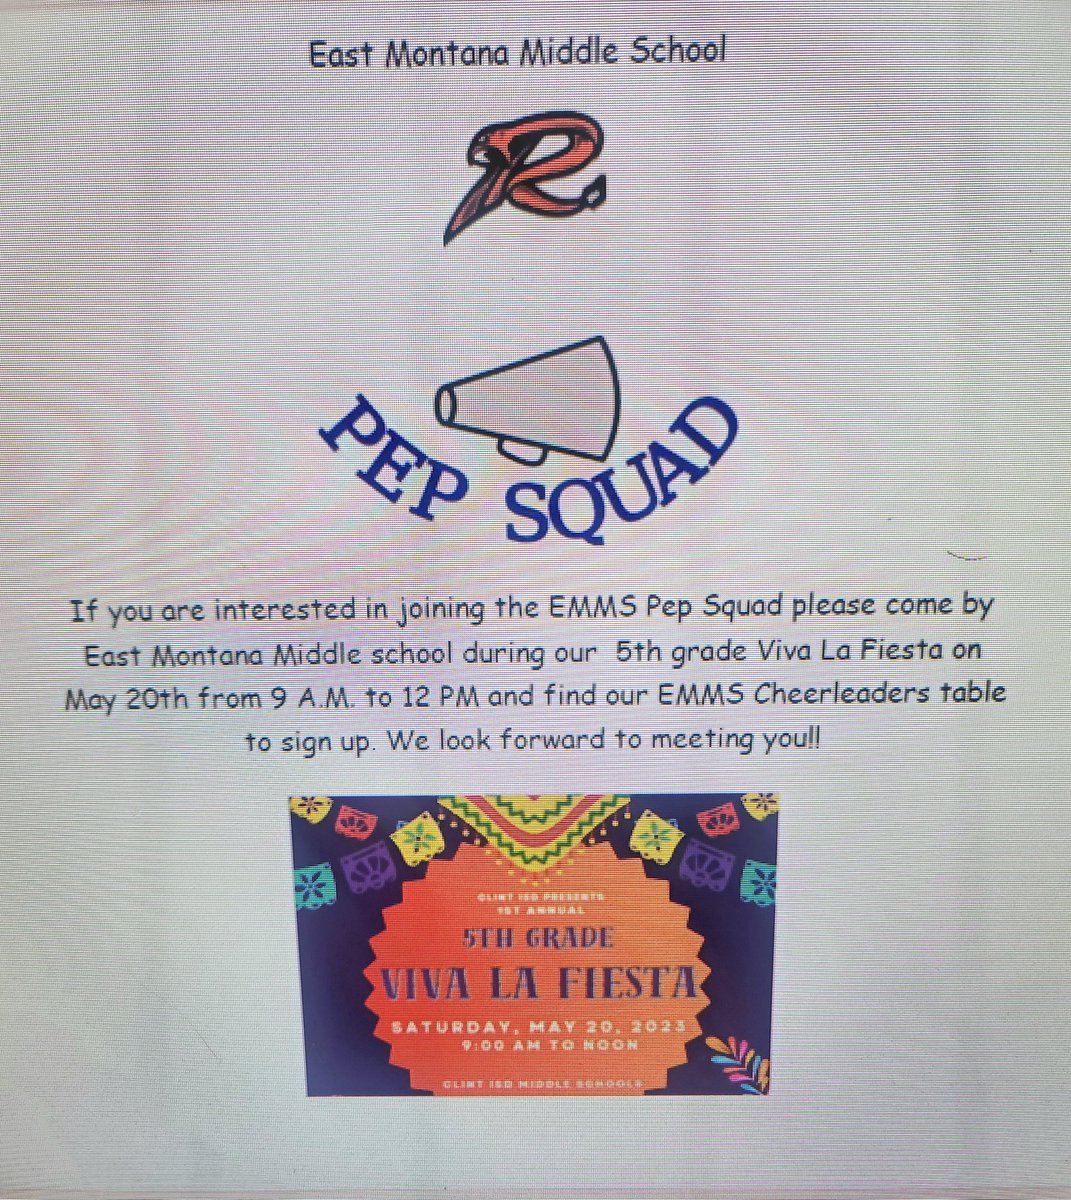 📣Calling out all incoming 6th graders @MontanaMiddle you all may sign up to join the PEP SQUAD!!!! SEE YOU SATURDAY FROM 9-12 AT EMMS!!!. @Cynthia34275842 @MsAyala8 @MVE_roadrunners @RSEcowboys @LobosLibrary @MVHSLobos #fearthestrike & #loboswillbeheard